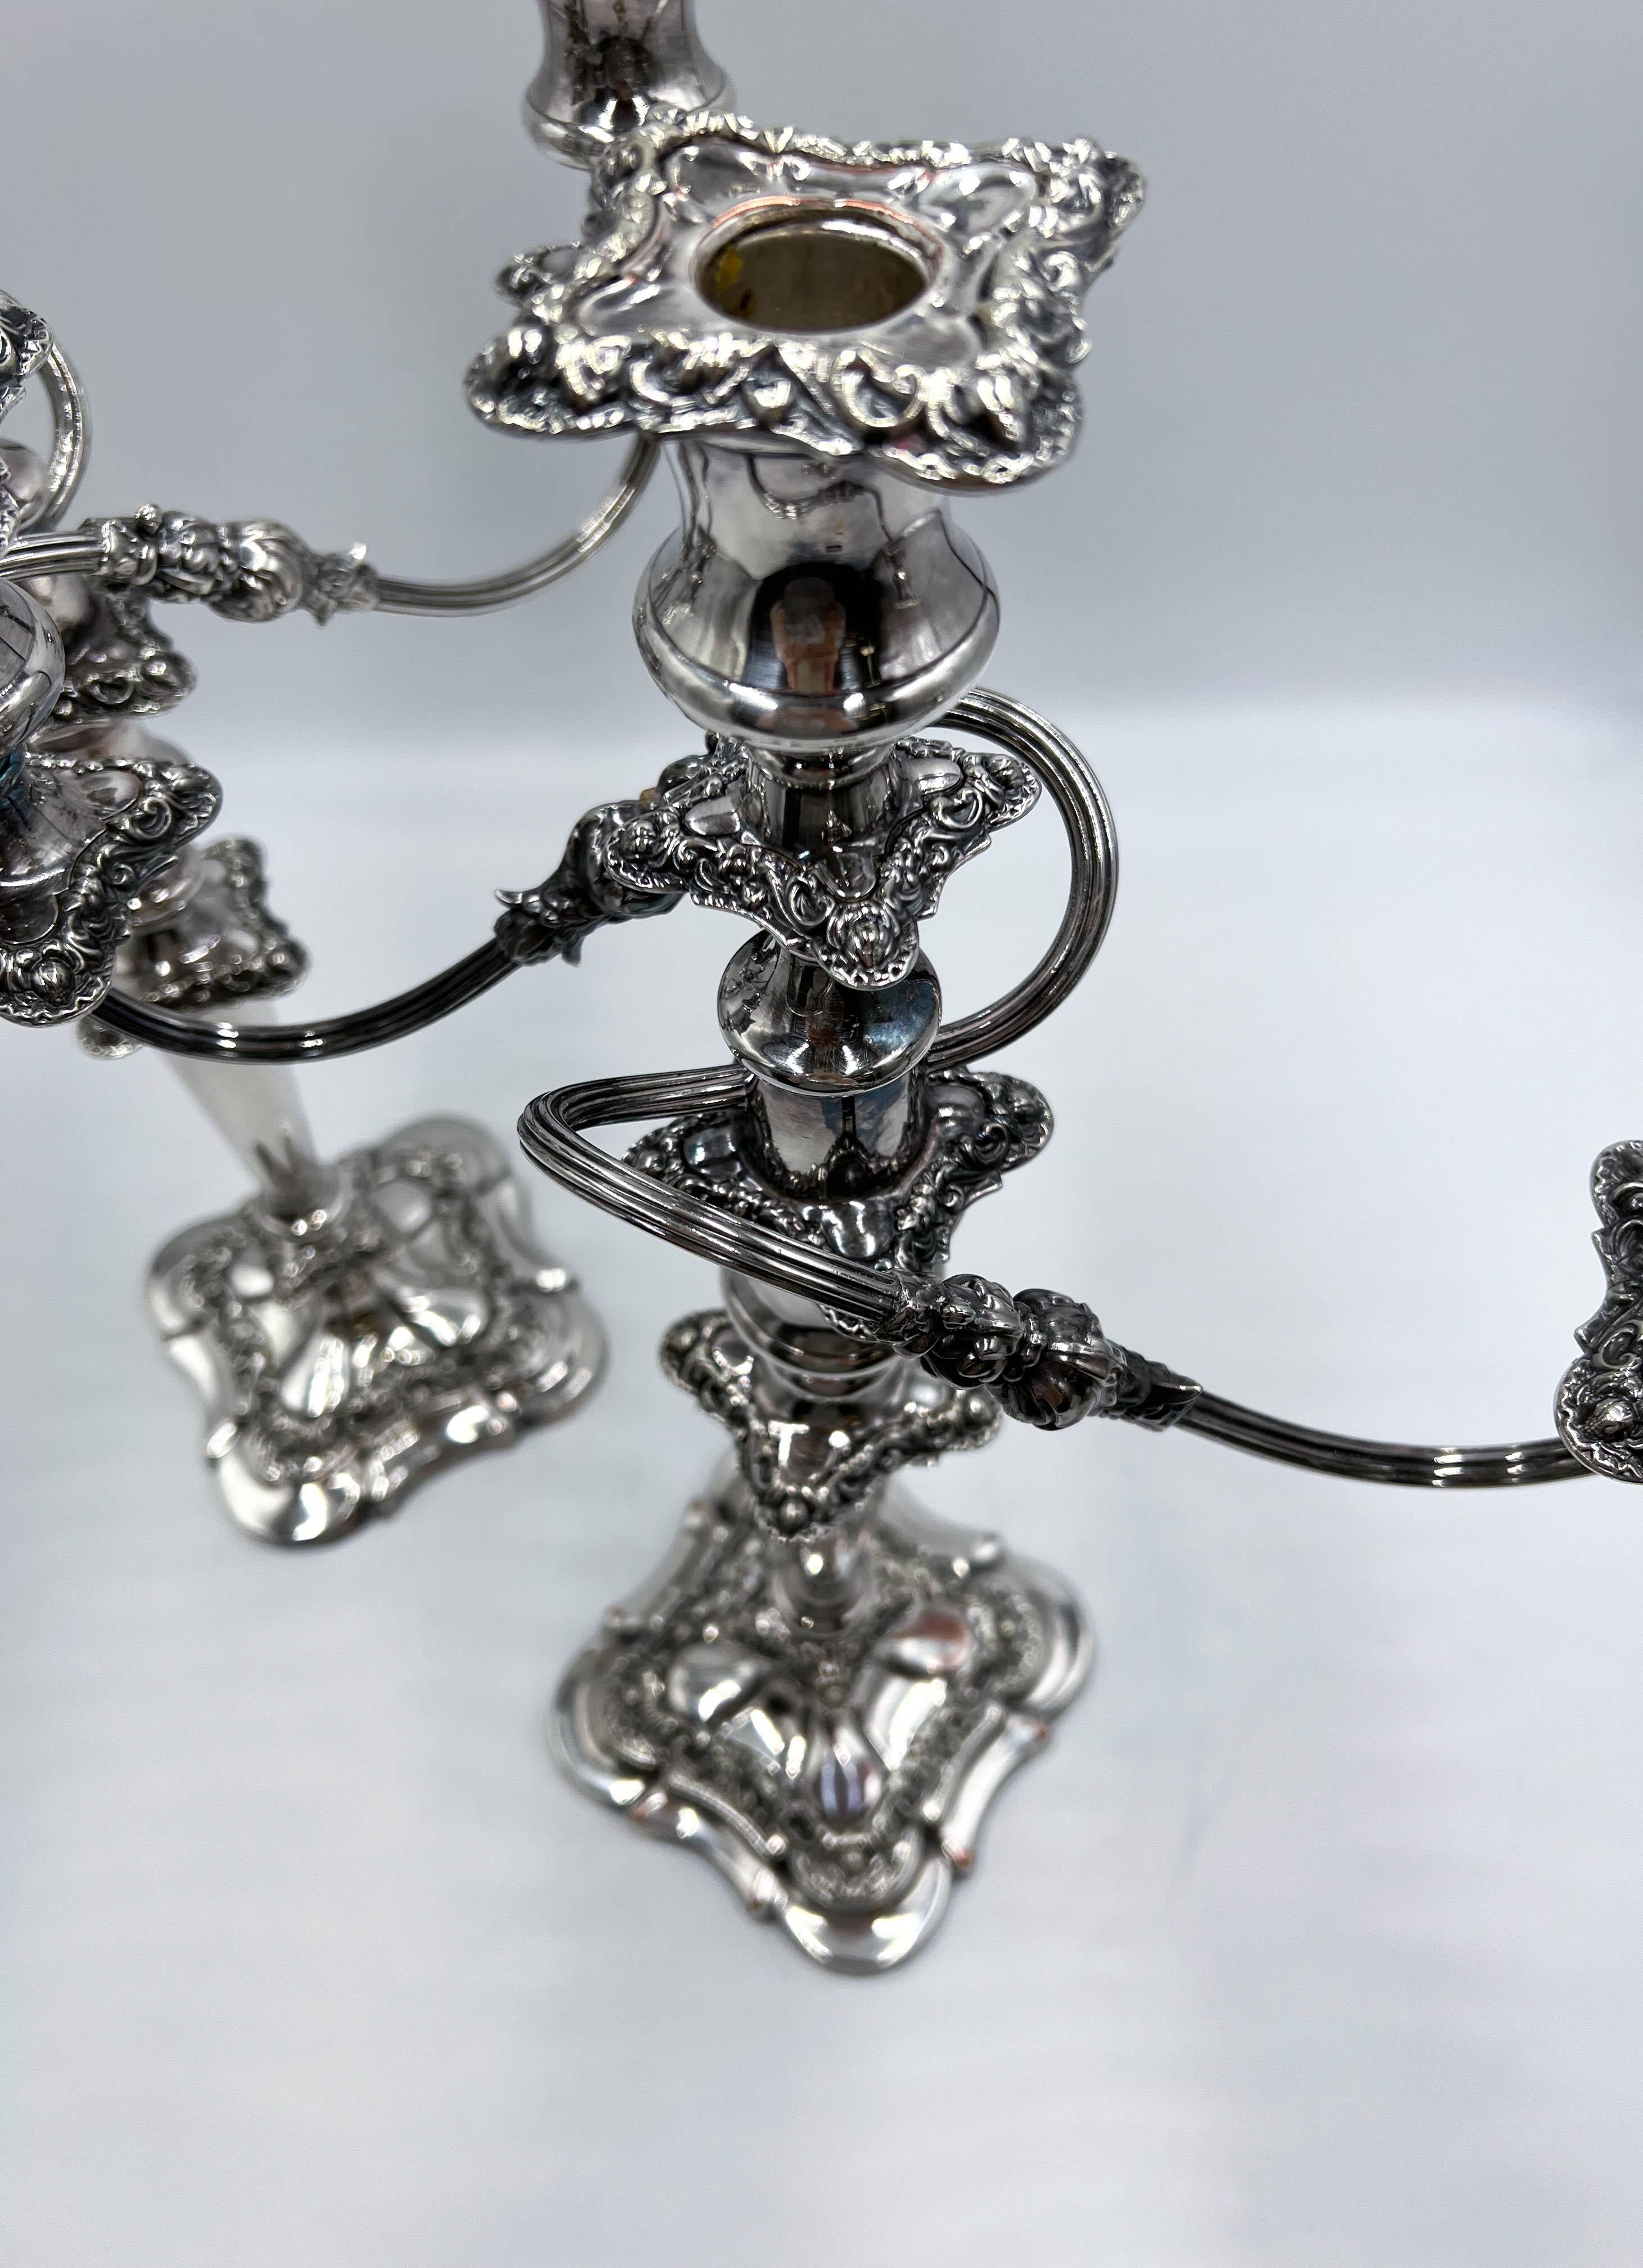 Pair of 1920s William Suckling Ltd English Silver Plate Candelabras/Candlesticks For Sale 5